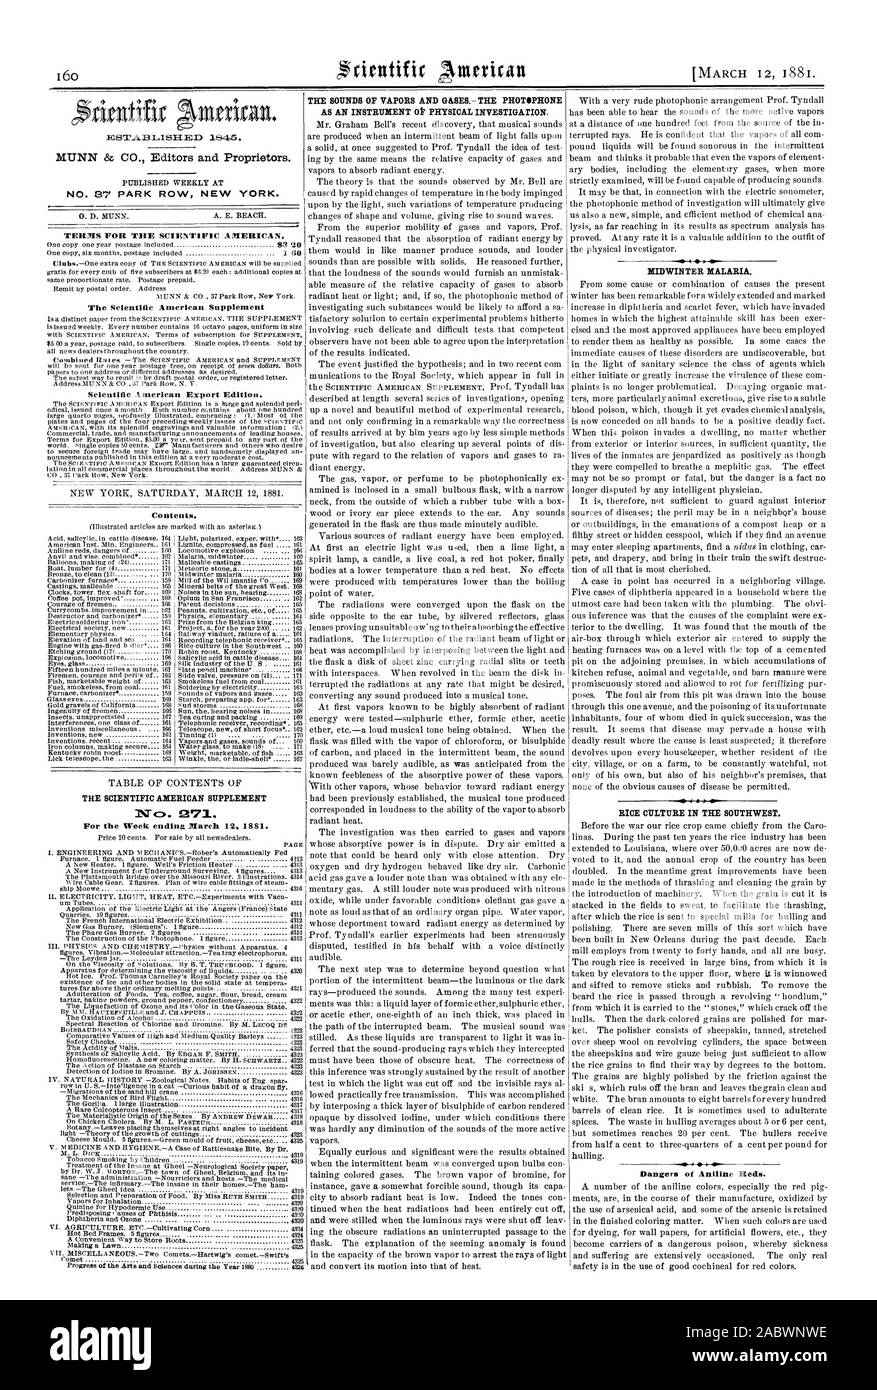 MUNN & CO. Editors and Proprietors. PUBLISHED WEEKLY AT NO. 37 PARK ROW NEW YORK. 0. D. MUNN. A. E. BEACH. TERMS FOR THE SCIENTIFIC AMERICAN. The Scientific American Supplement Scientific American Export Edition. Contents. THE SCIENTIFIC AMERICAN SUPPLEMENT 071. For the Week ending March 12. 1881. THE SOUNDS OF VAPORS AND GASES THE PHOTOPHONE AS AN INSTRUMENT Ok PHYSICAL INVESTIGATION. Mr. Graham Bell's recent discovery that musical sounds are produced when an intermittent beam of light falls upon a solid at once suggested to Prof. Tyndall the idea of test ing by the same means the relative Stock Photo